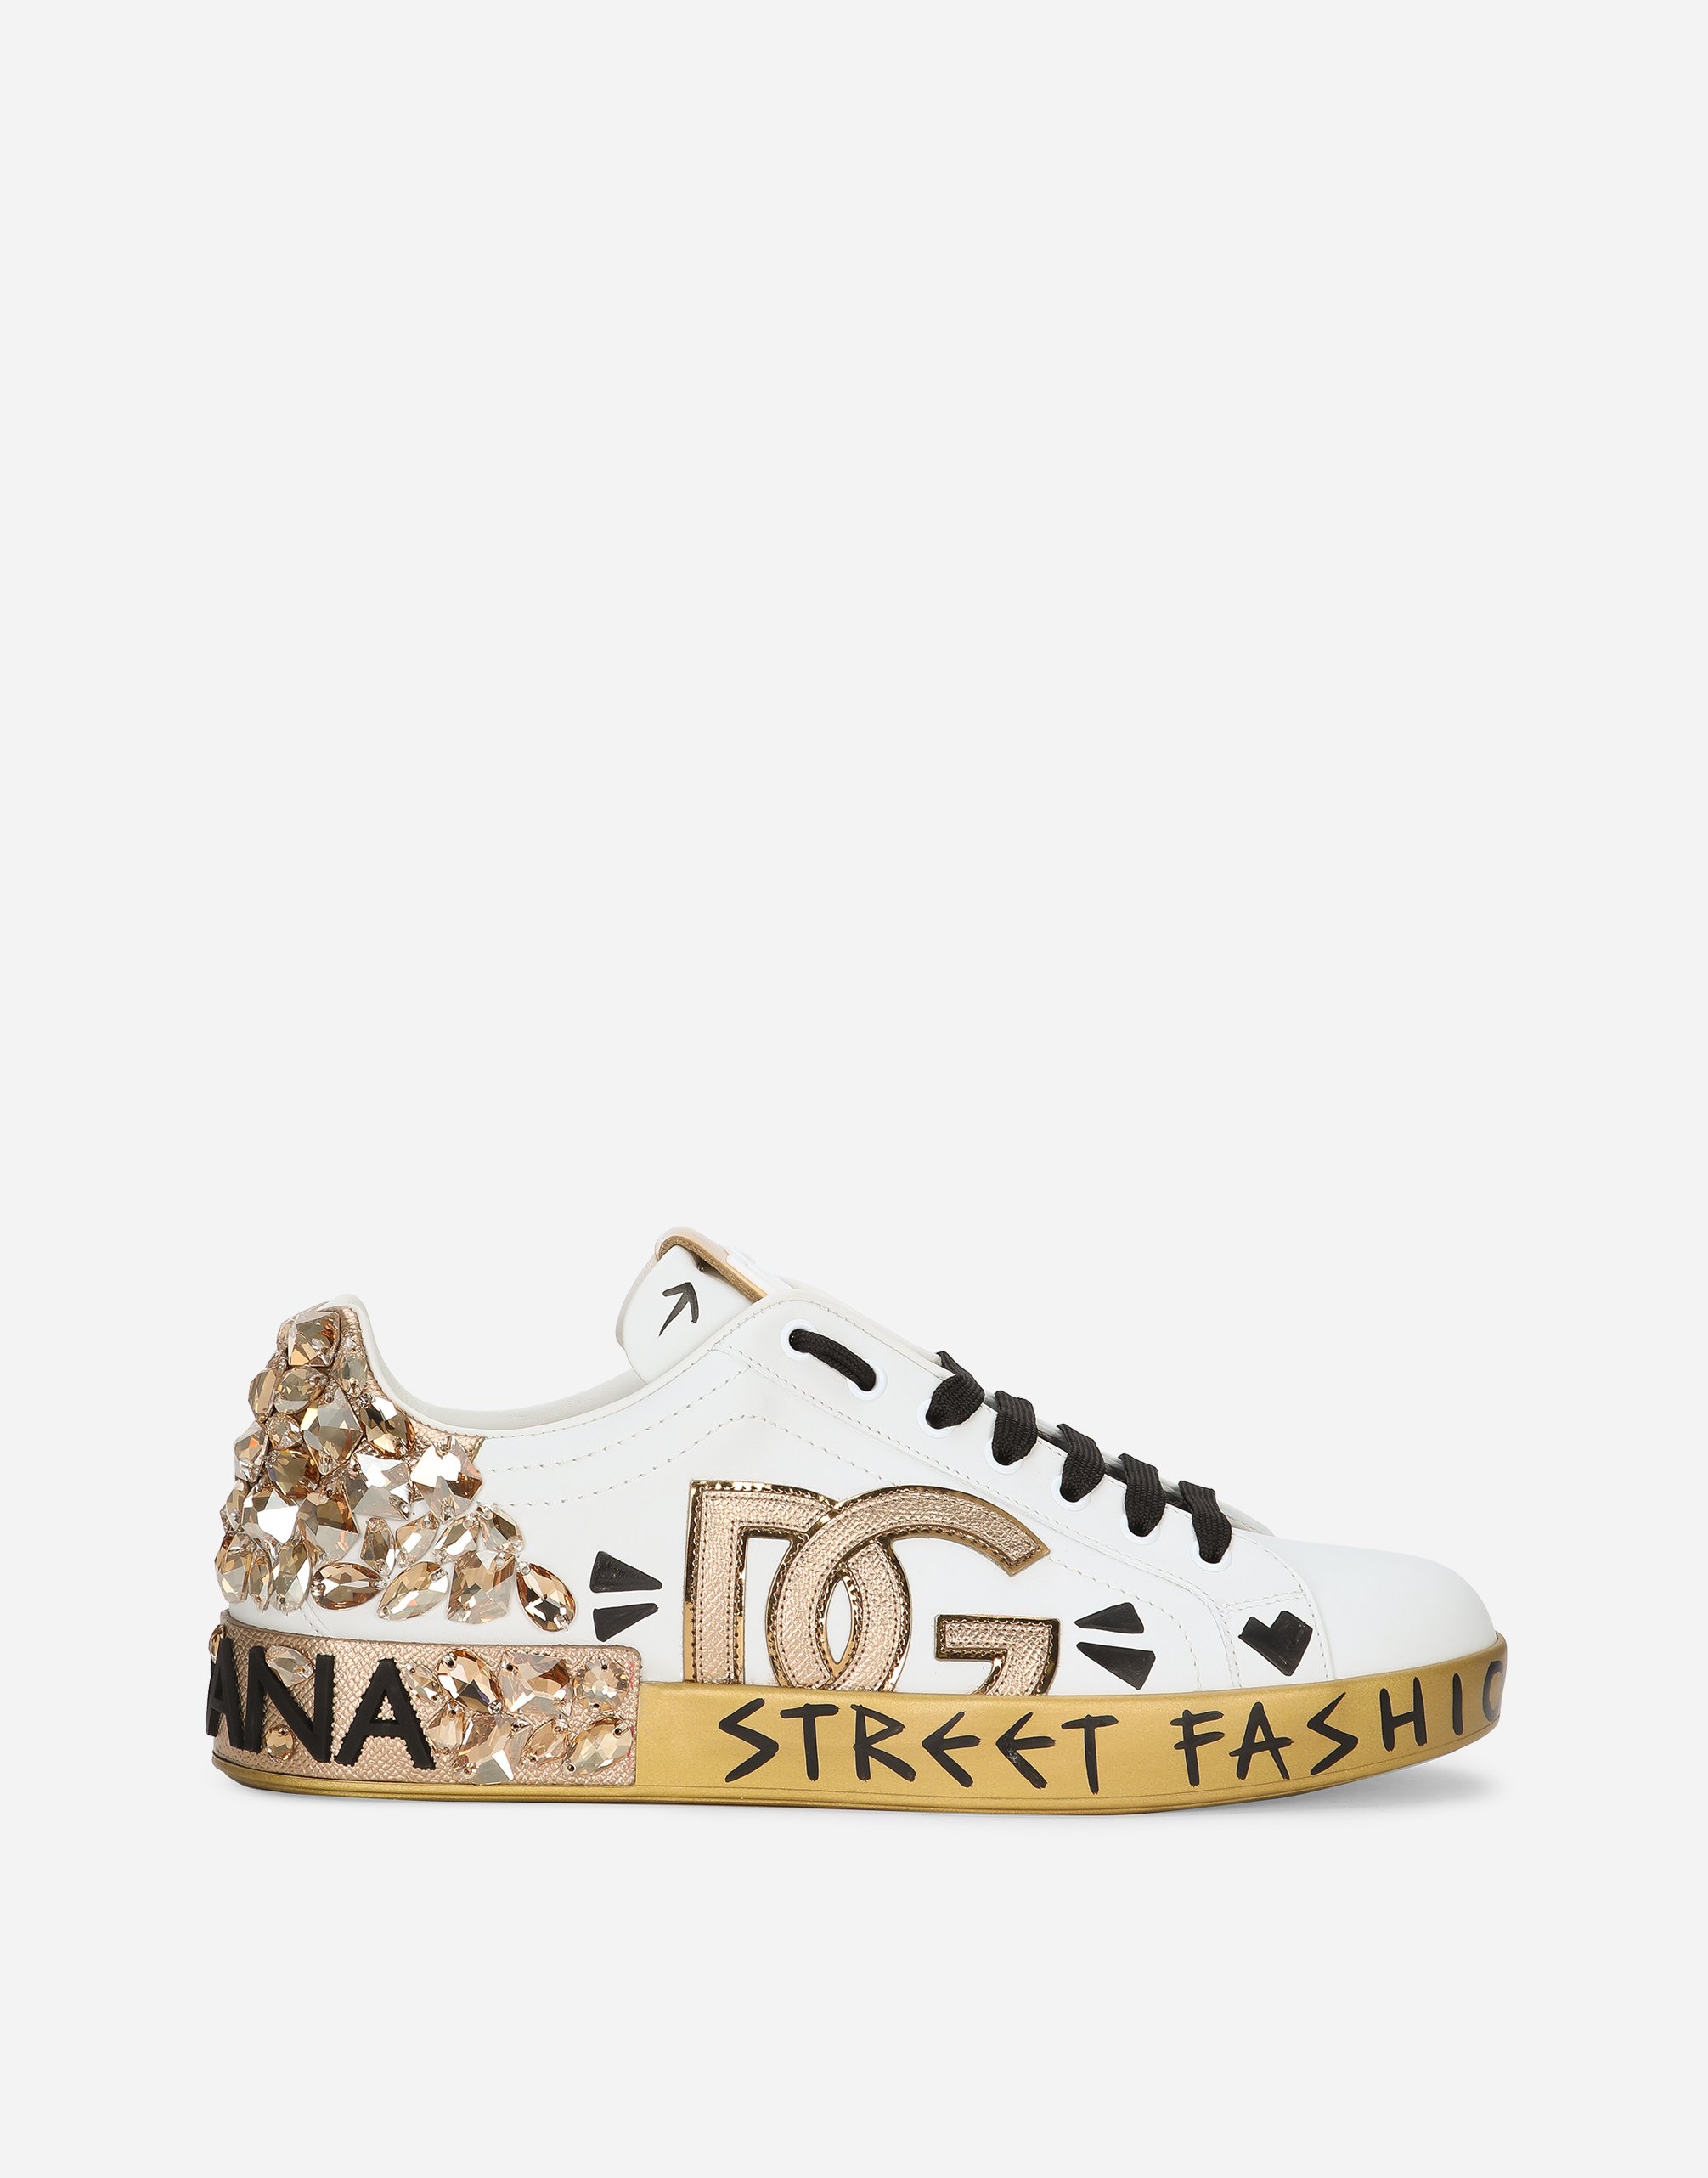 Printed calfskin nappa Portofino sneakers with DG logo and embroidery in White